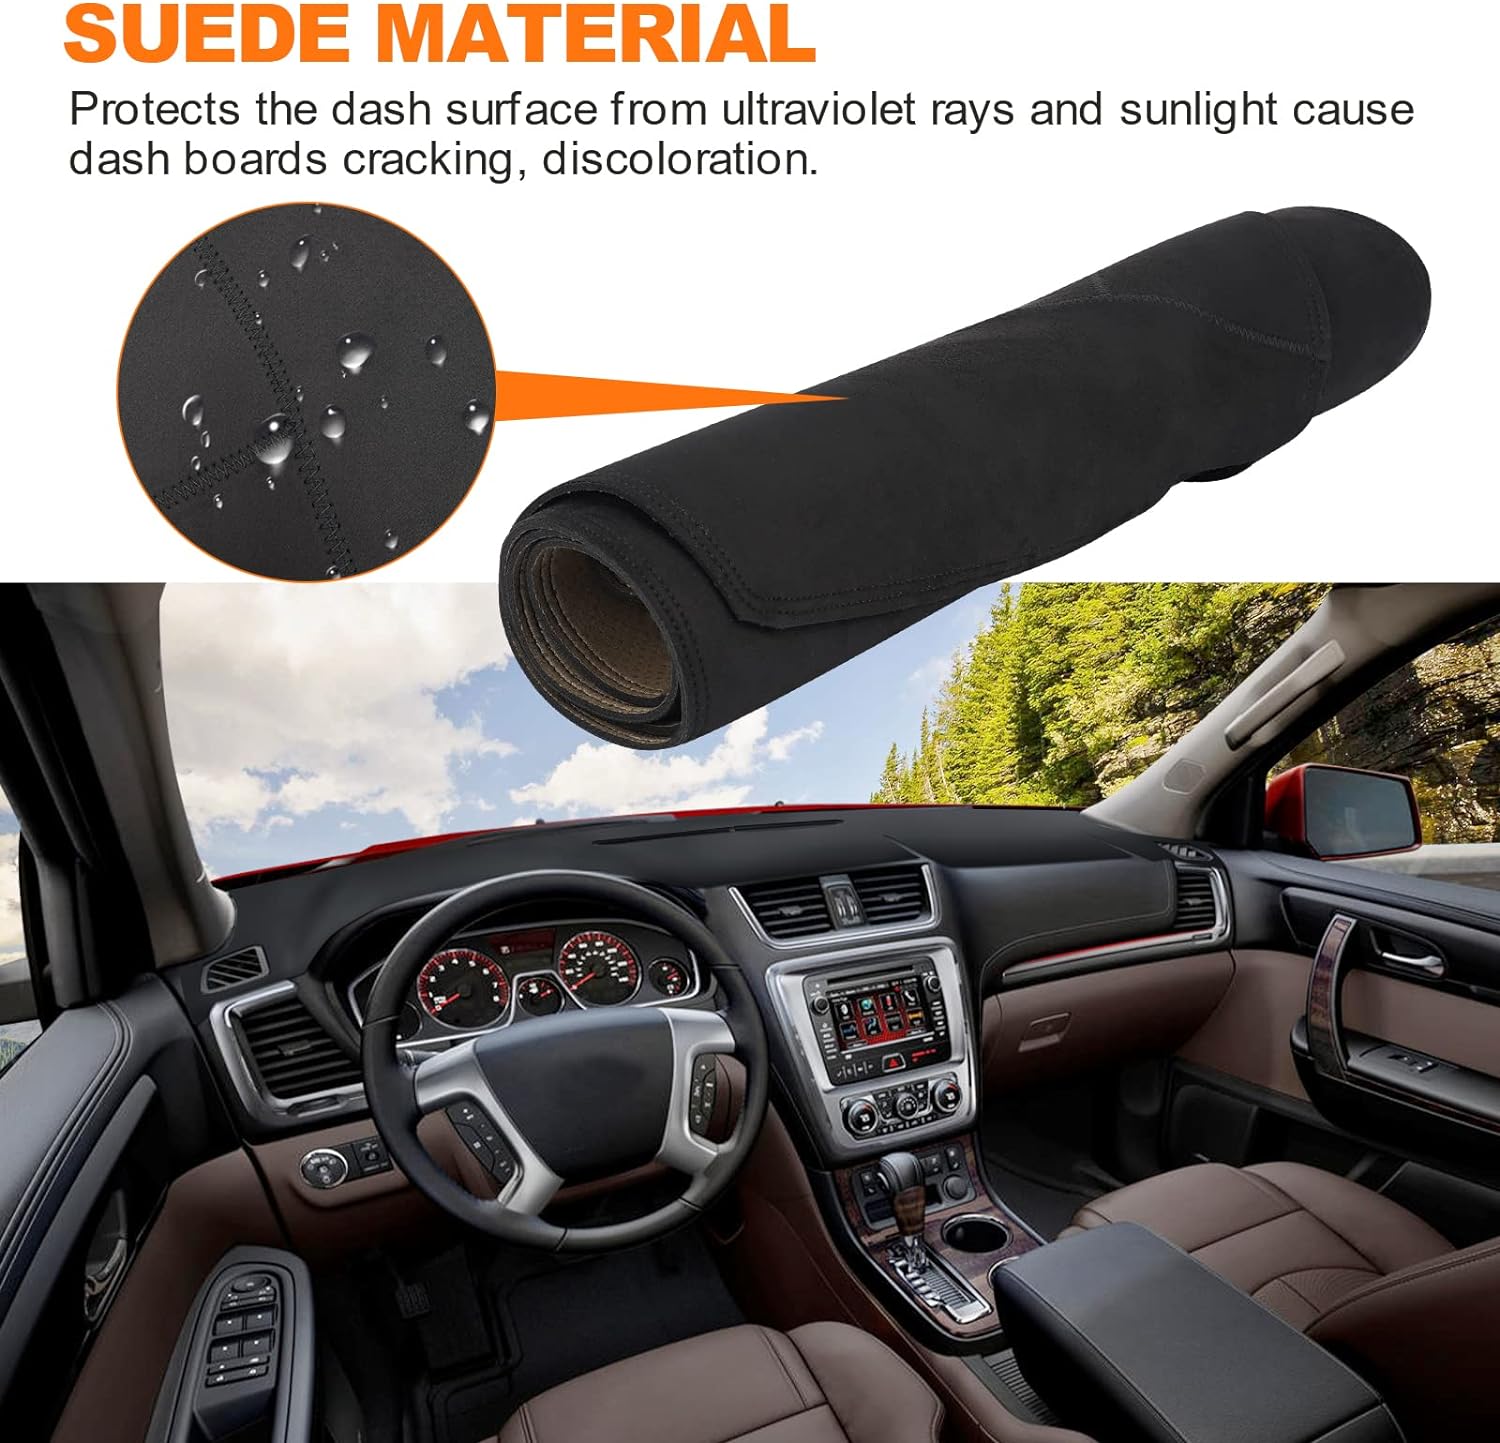 SUPAREE Chevy Chevrolet Dashboard Cover Waterproof for Suburban Tahoe GMC Yukon Product description